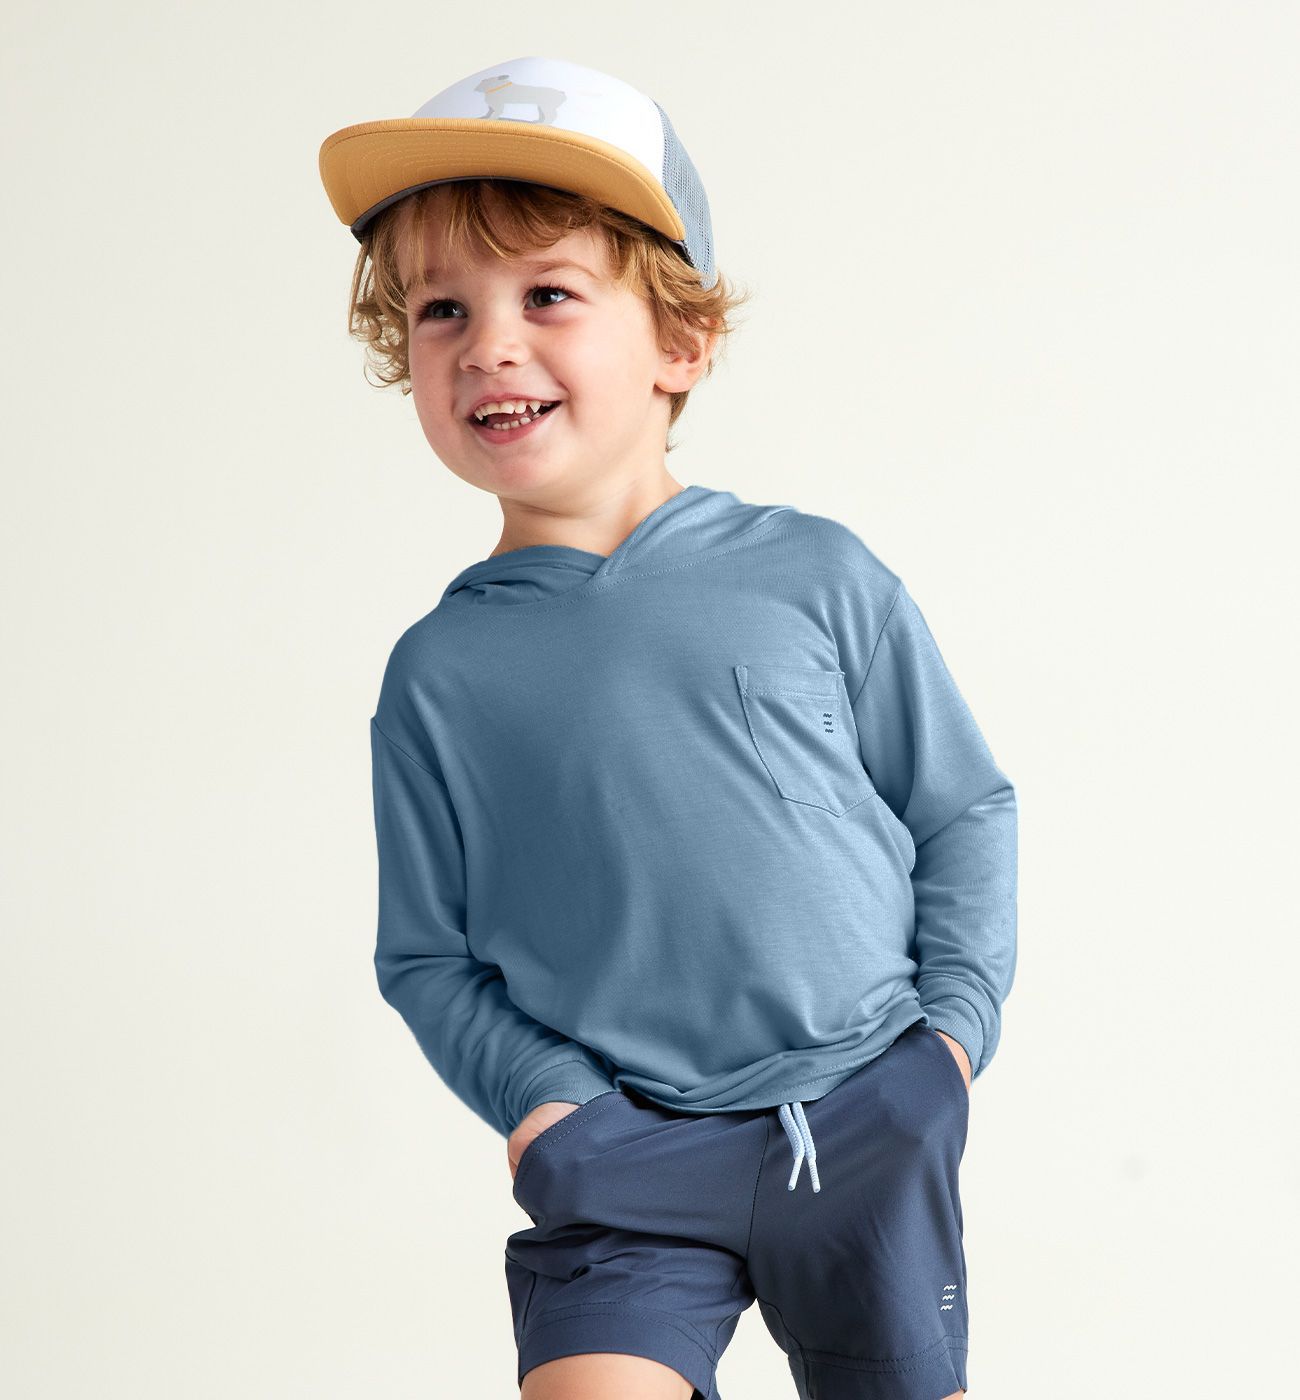 Boys Bamboo Shade Hoodie - Stormy Sea, Size: SM (7/8)